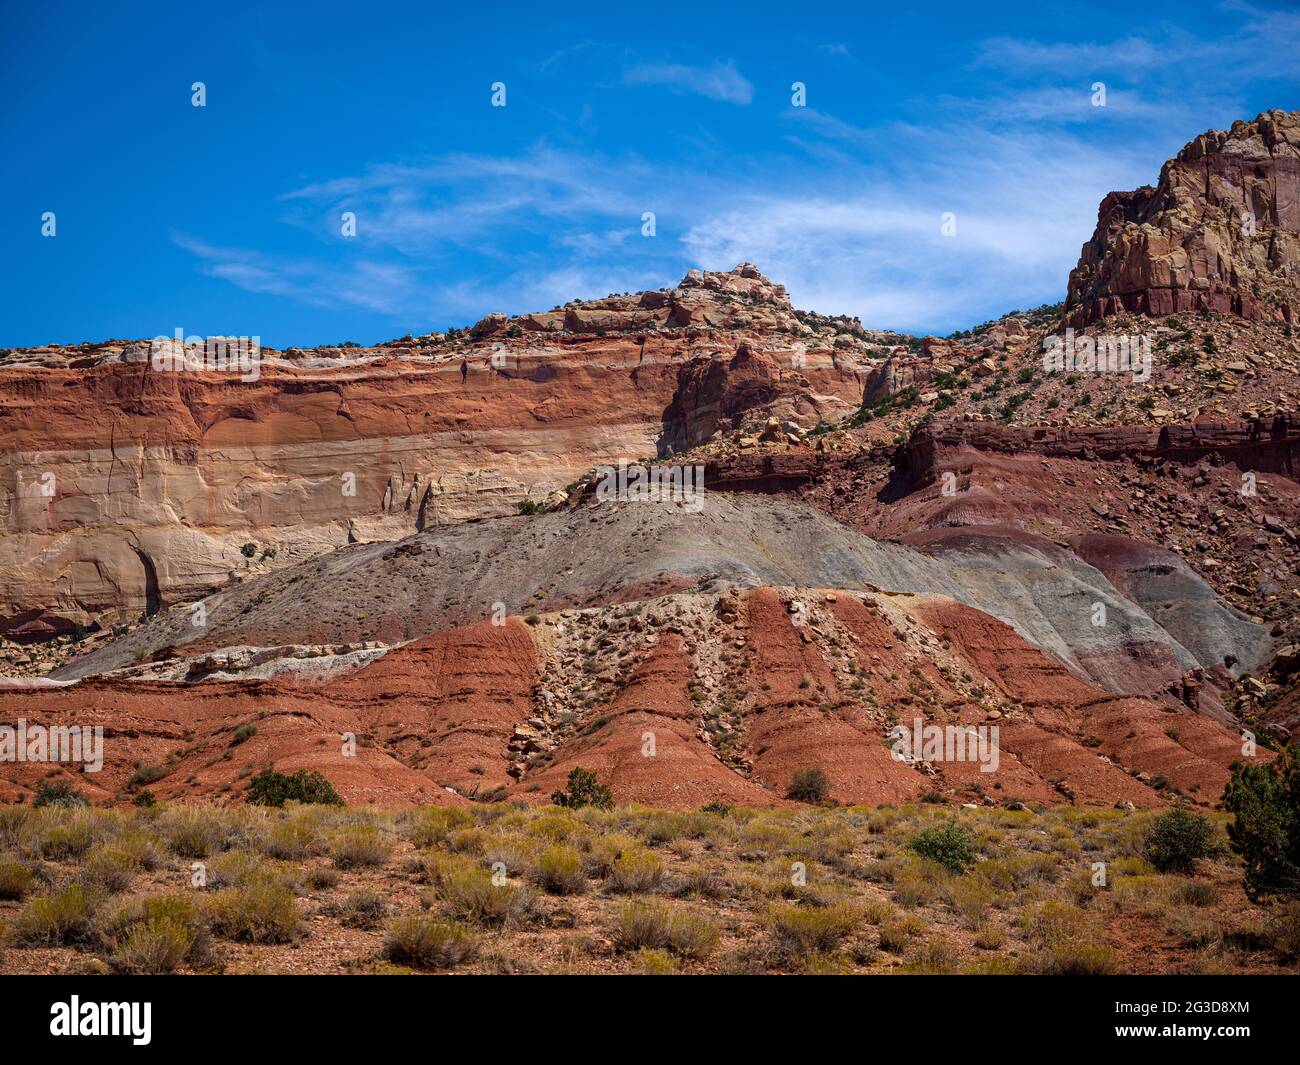 CAPITOL REEF NATIONAL PARK, UTAH - CIRCA AUGUST 2020: Entrance to the main road and trails to the Grand Wash area of Capitol Reef National Park Nation Stock Photo